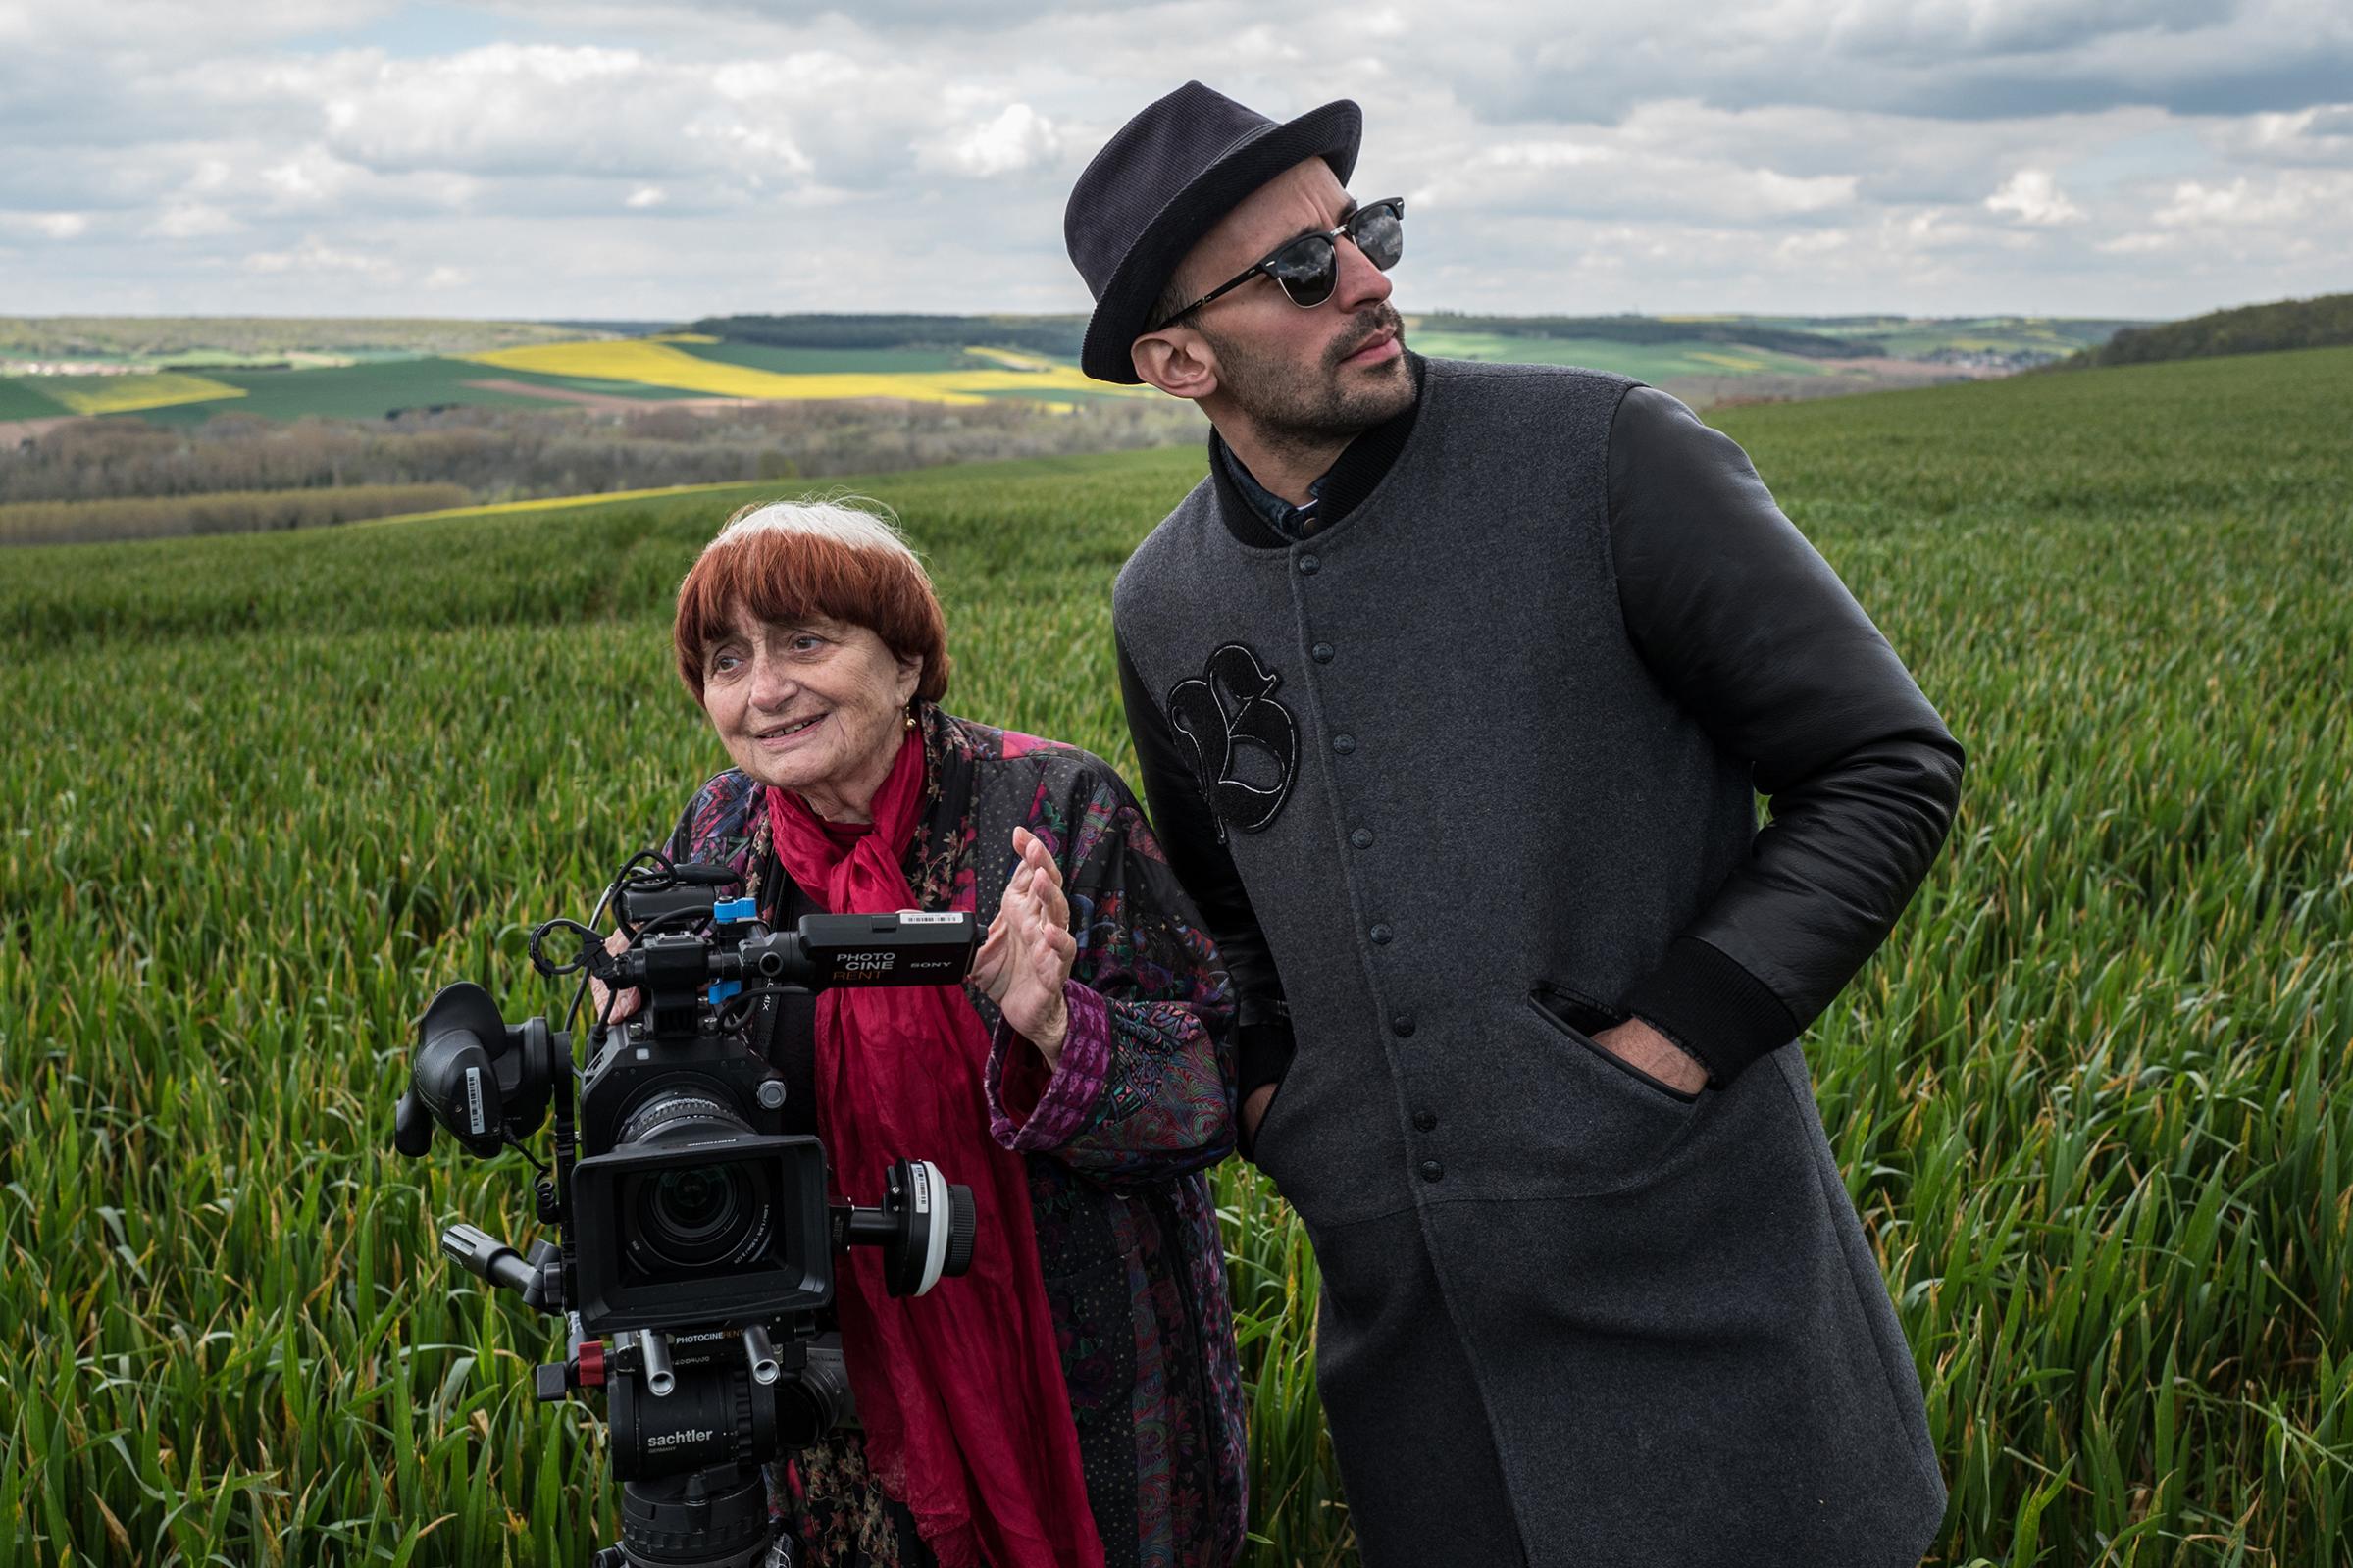 Filmmaker Agnès Varda and French street artist JR co-directed Faces Places